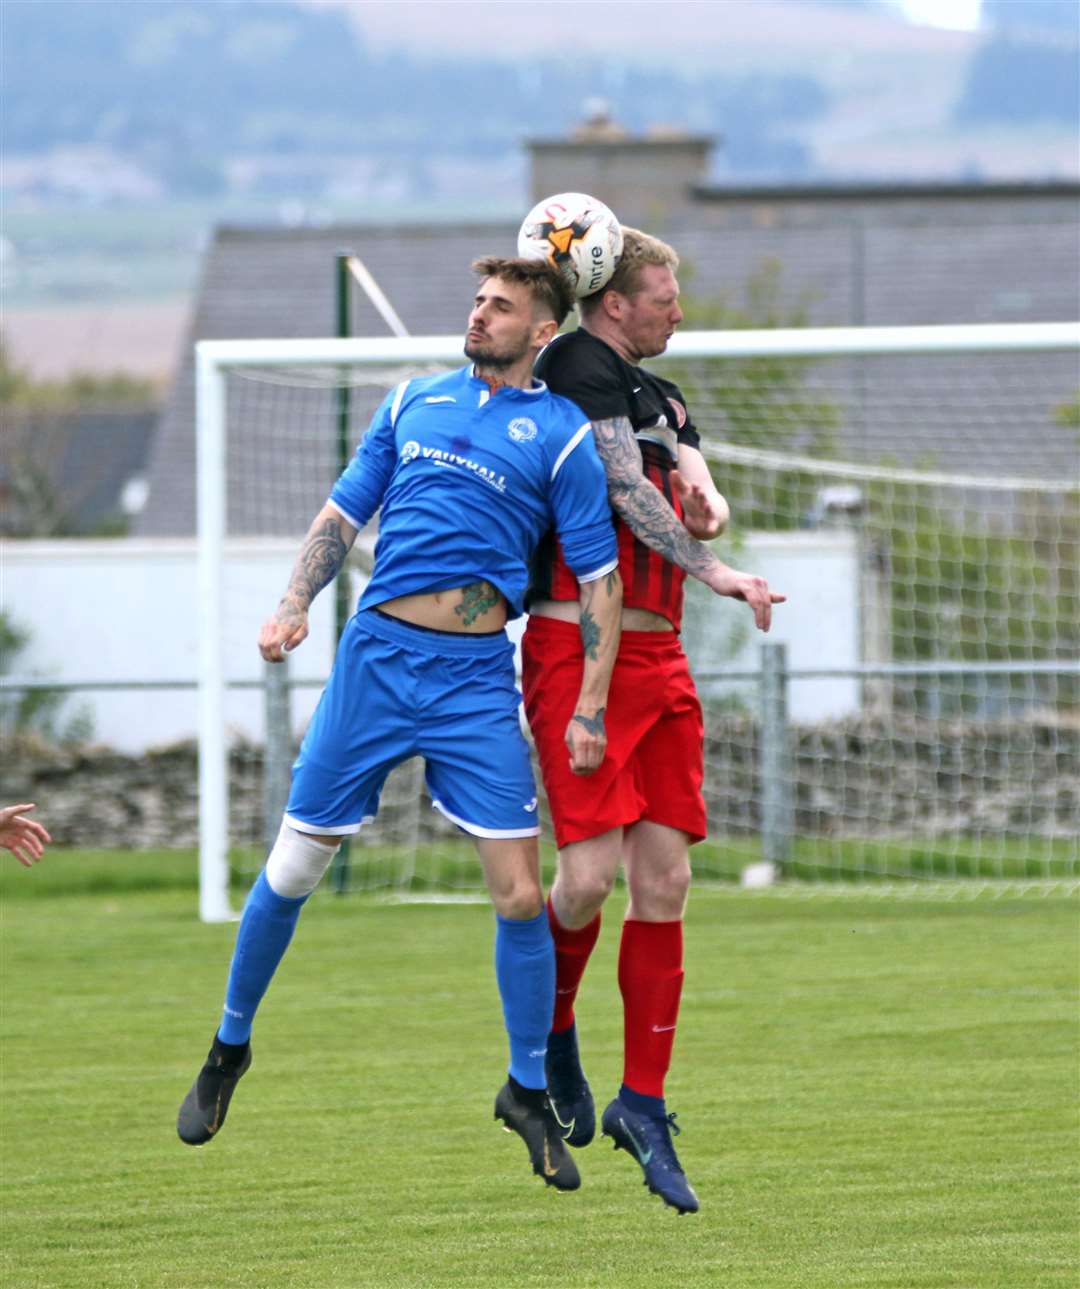 Golspie's Liam Bremner and Halkirk United's Aiden Reid compete for a high ball. Picture: James Gunn